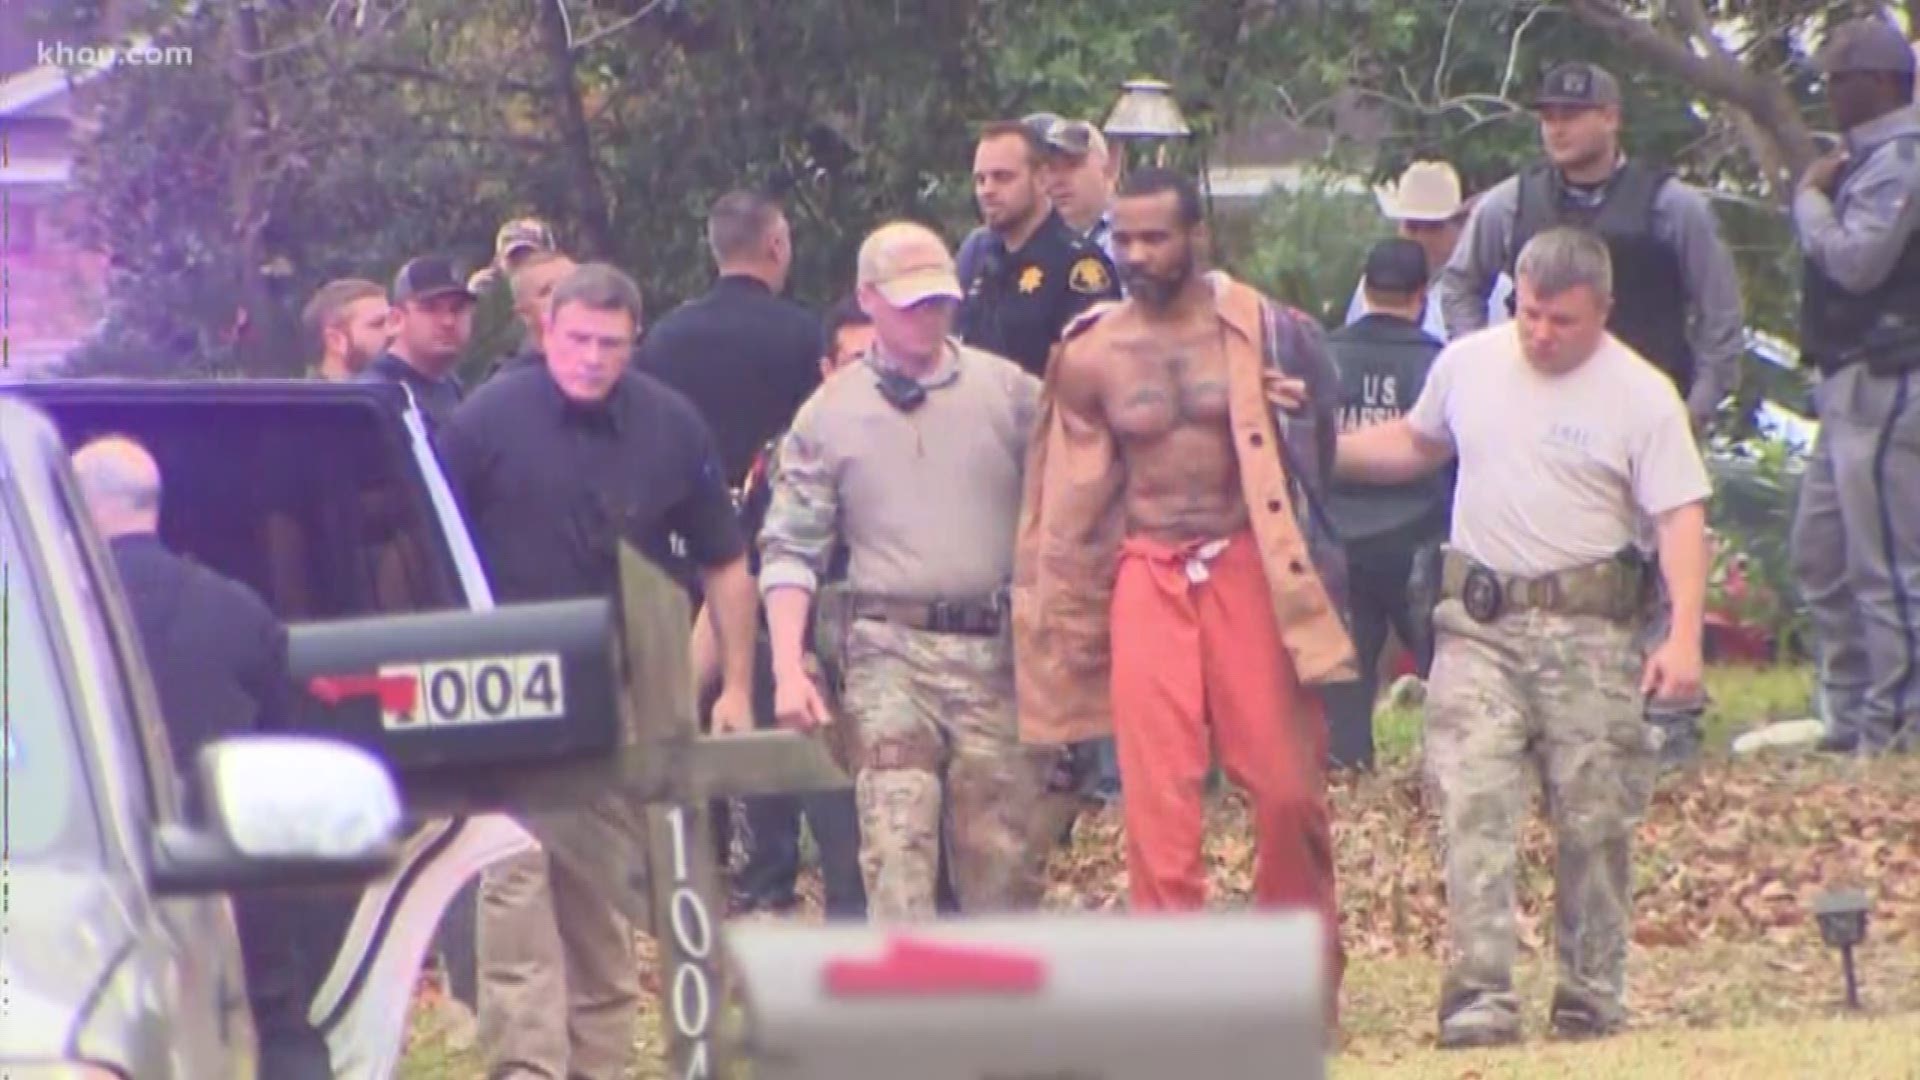 Texas Prisoners Transportation Services is closing its doors Sunday, one week after Cedric Marks escaped from the company's custody and led 17 agencies on a nine-hour manhunt.

Marks was being transported from Michigan to Temple in connection with the murders of his ex-girlfriend Jenna Scott and her friend Michael Swearingin.